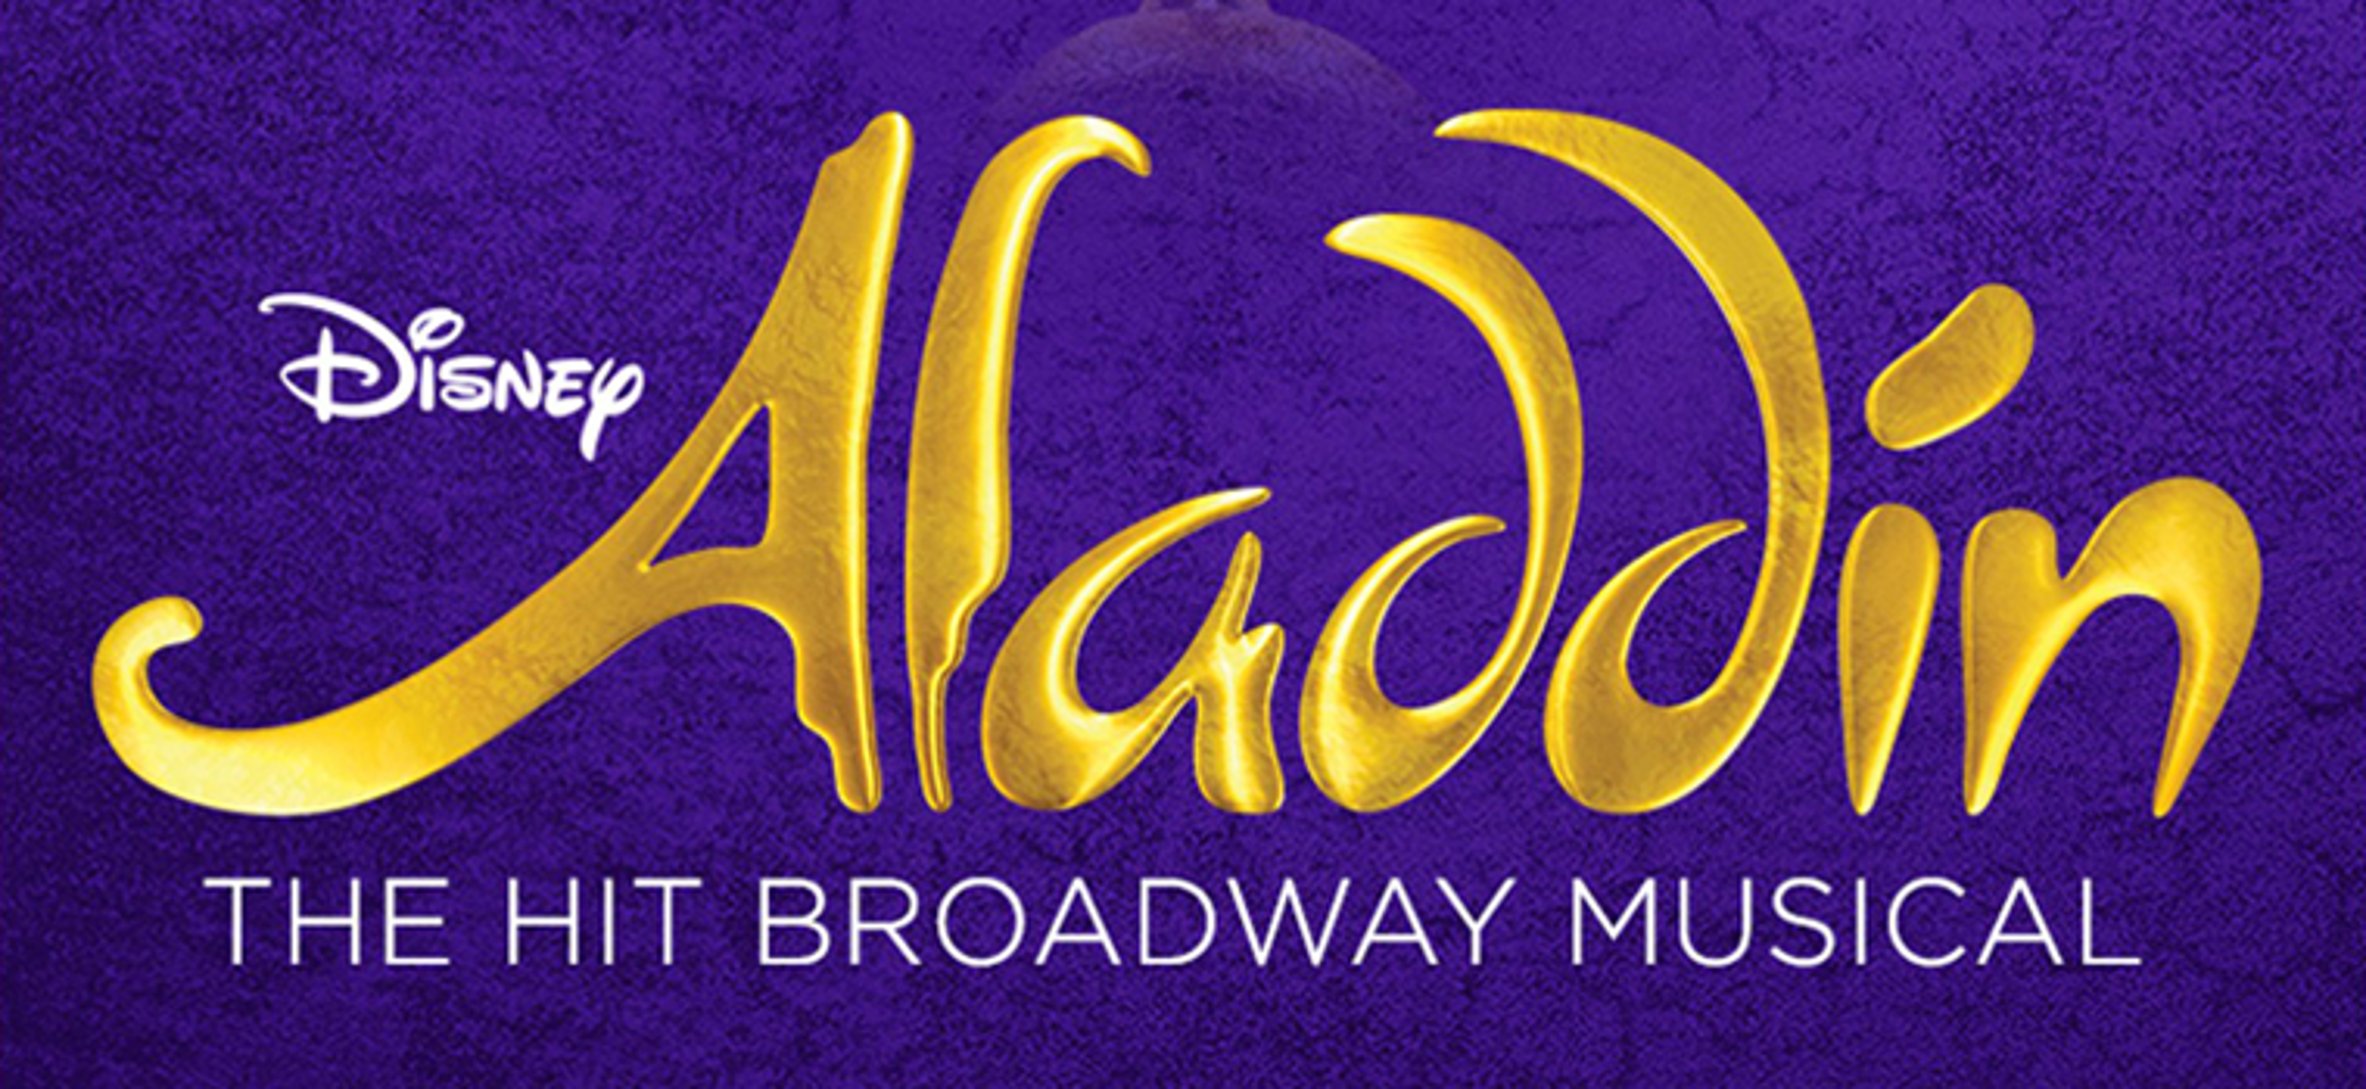 Casting Roles For The Broadway Production of Disney's Aladdin!